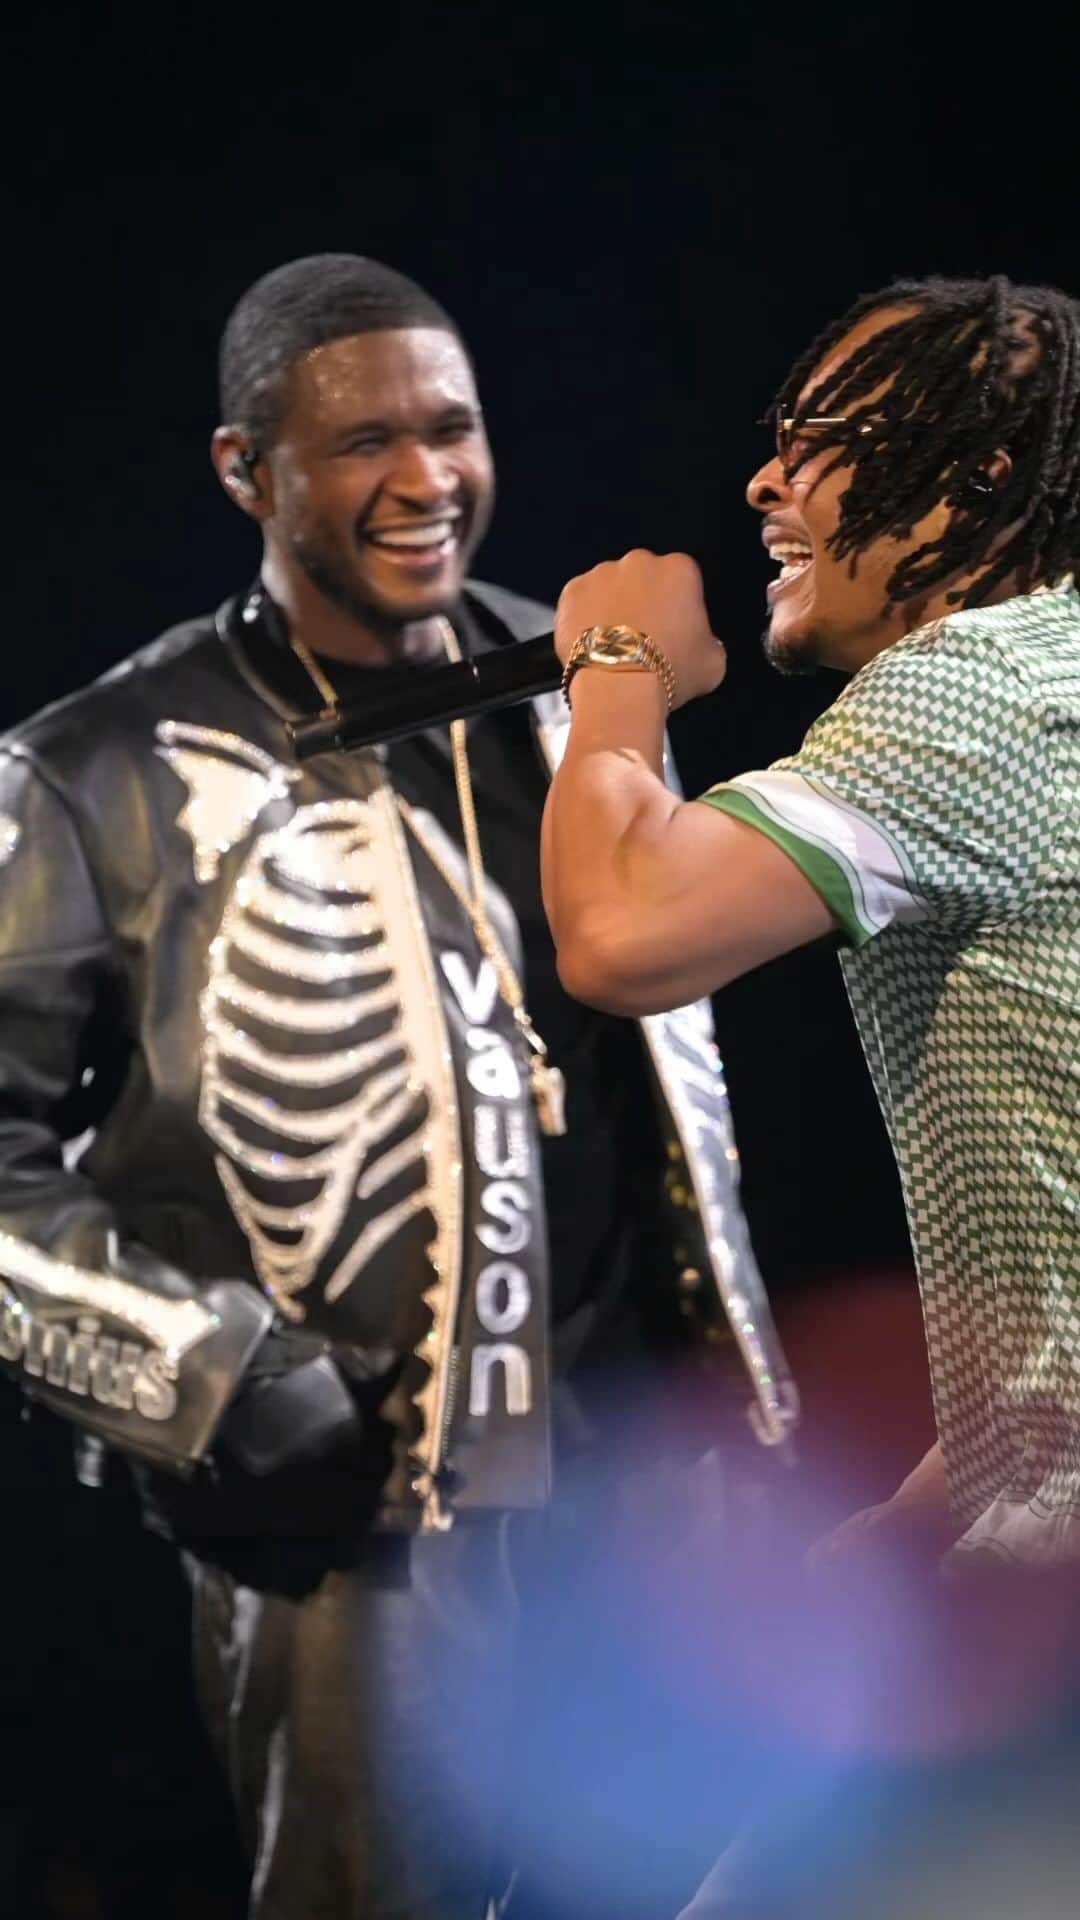 T.I.のインスタグラム：「Got a chance to hit the stage again with my patna last night & 🆙 we went‼️ Always a great time the legend @usher... Had to show him he ain't da only Sex Symbol in da house,udigg😂😂😂 But If you ain't went to vegas to catch his show You Trippin,Trippin... Bruh putting on fa da city!!! Da strong way !!!」